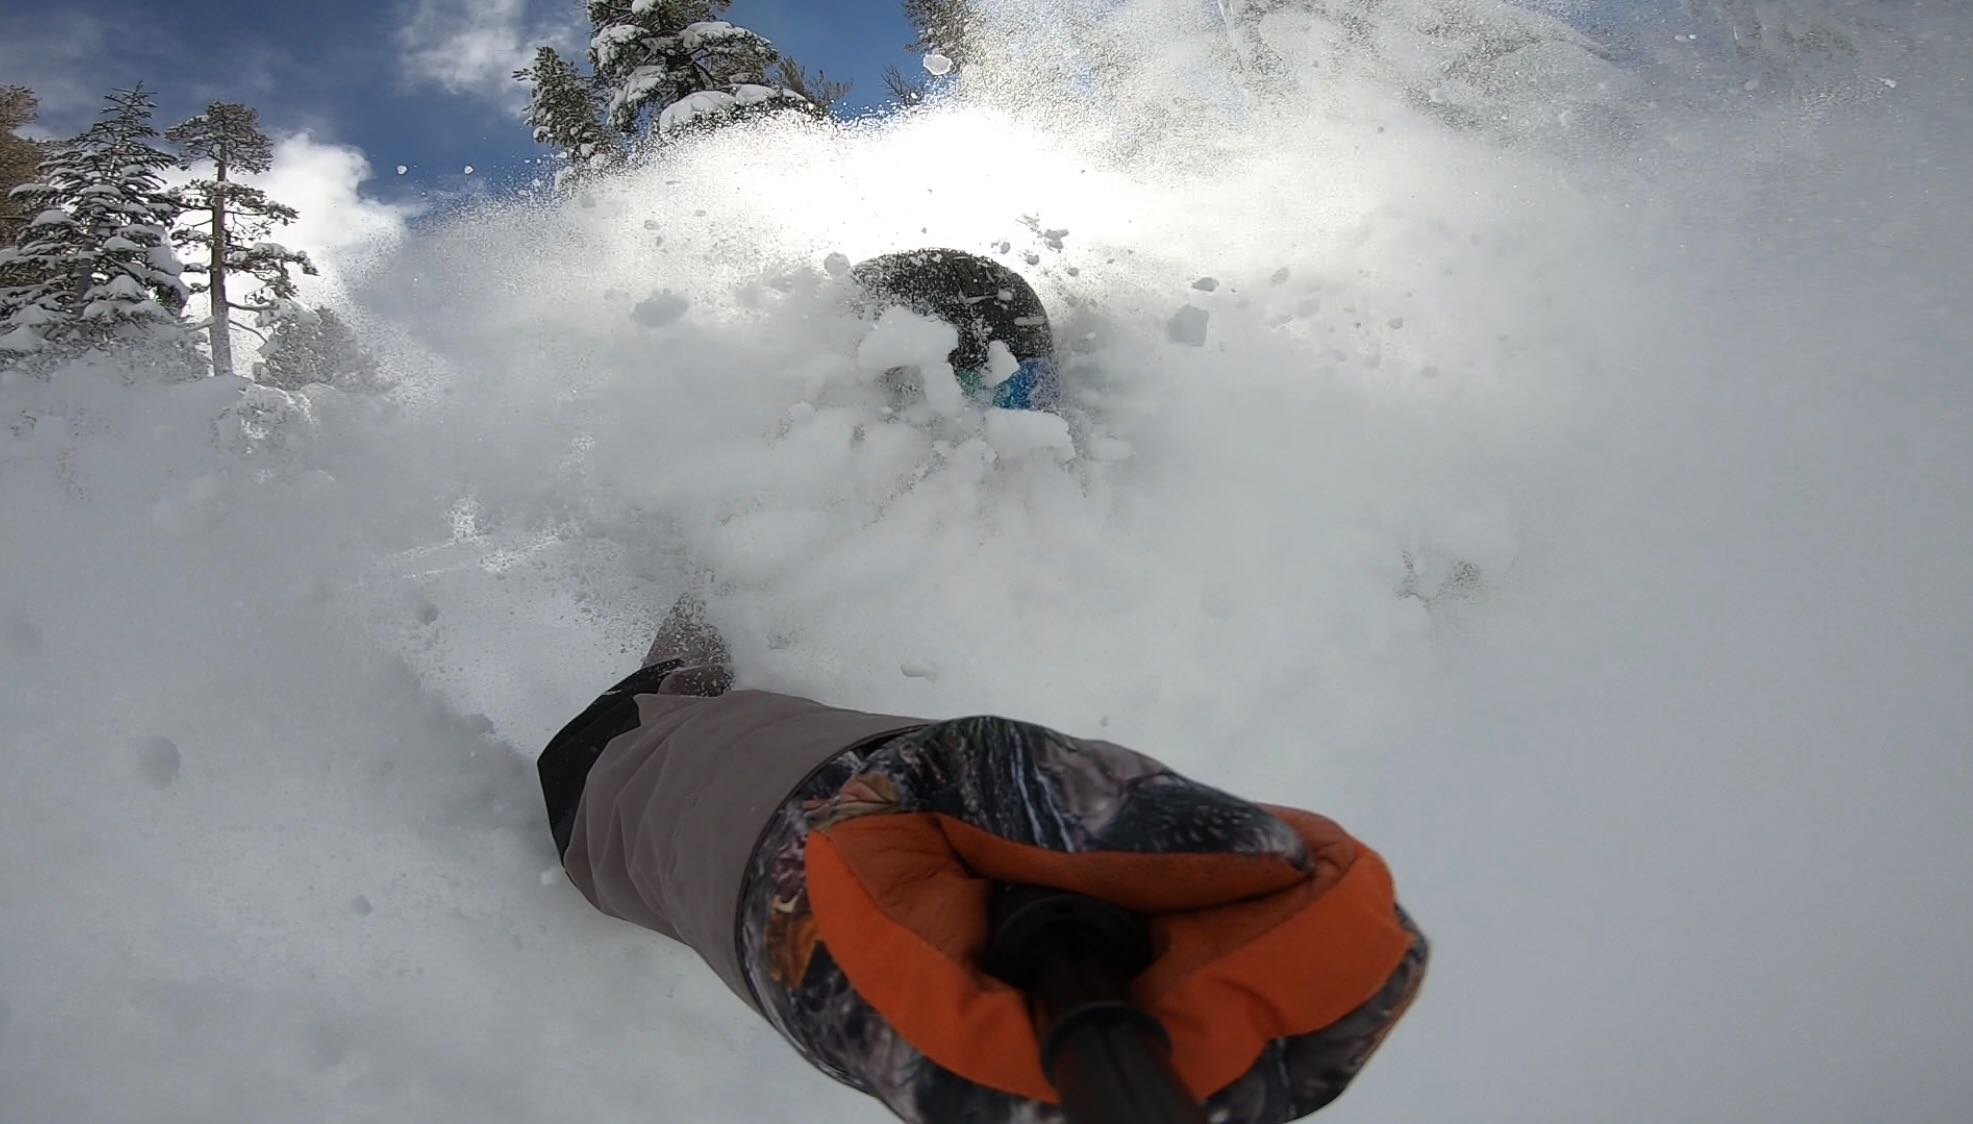 23 Feet in Two Weeks | Conditions in Tahoe are Perfect